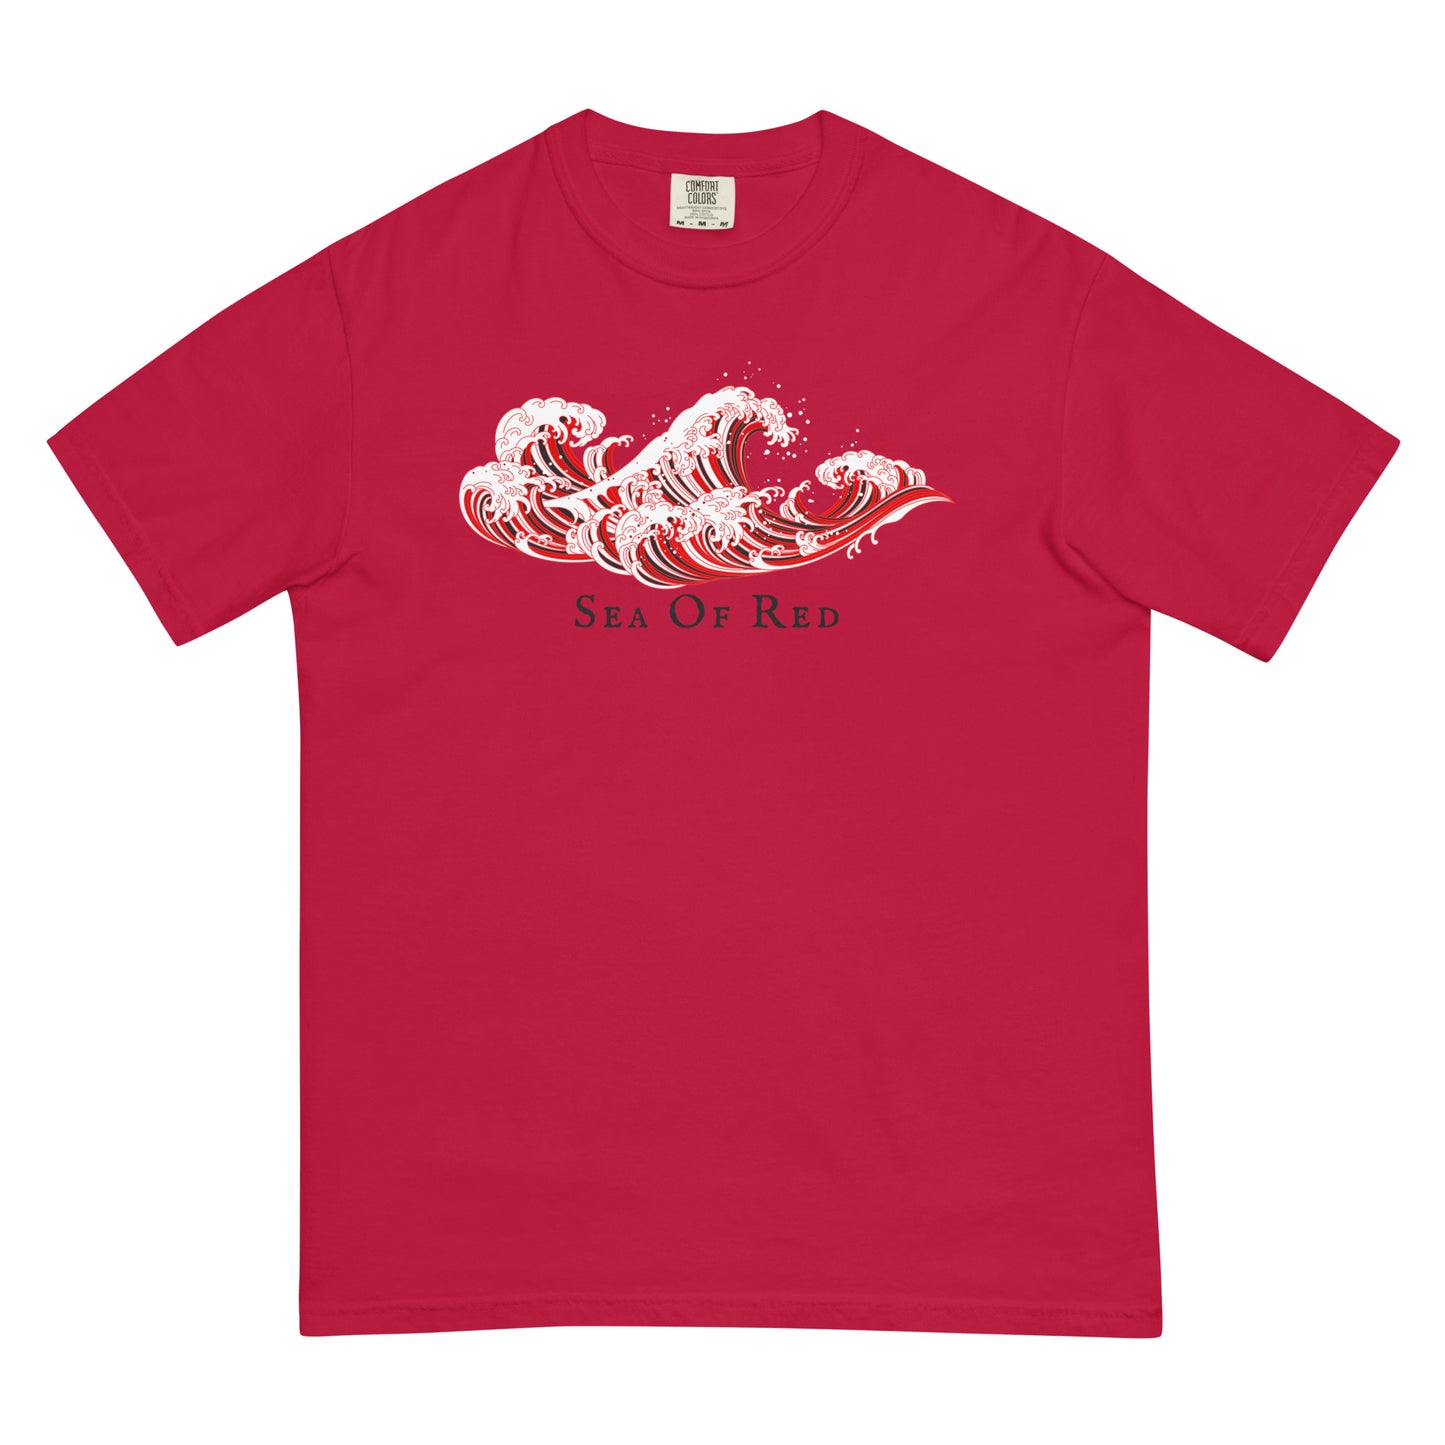 Sea of Red T-shirt